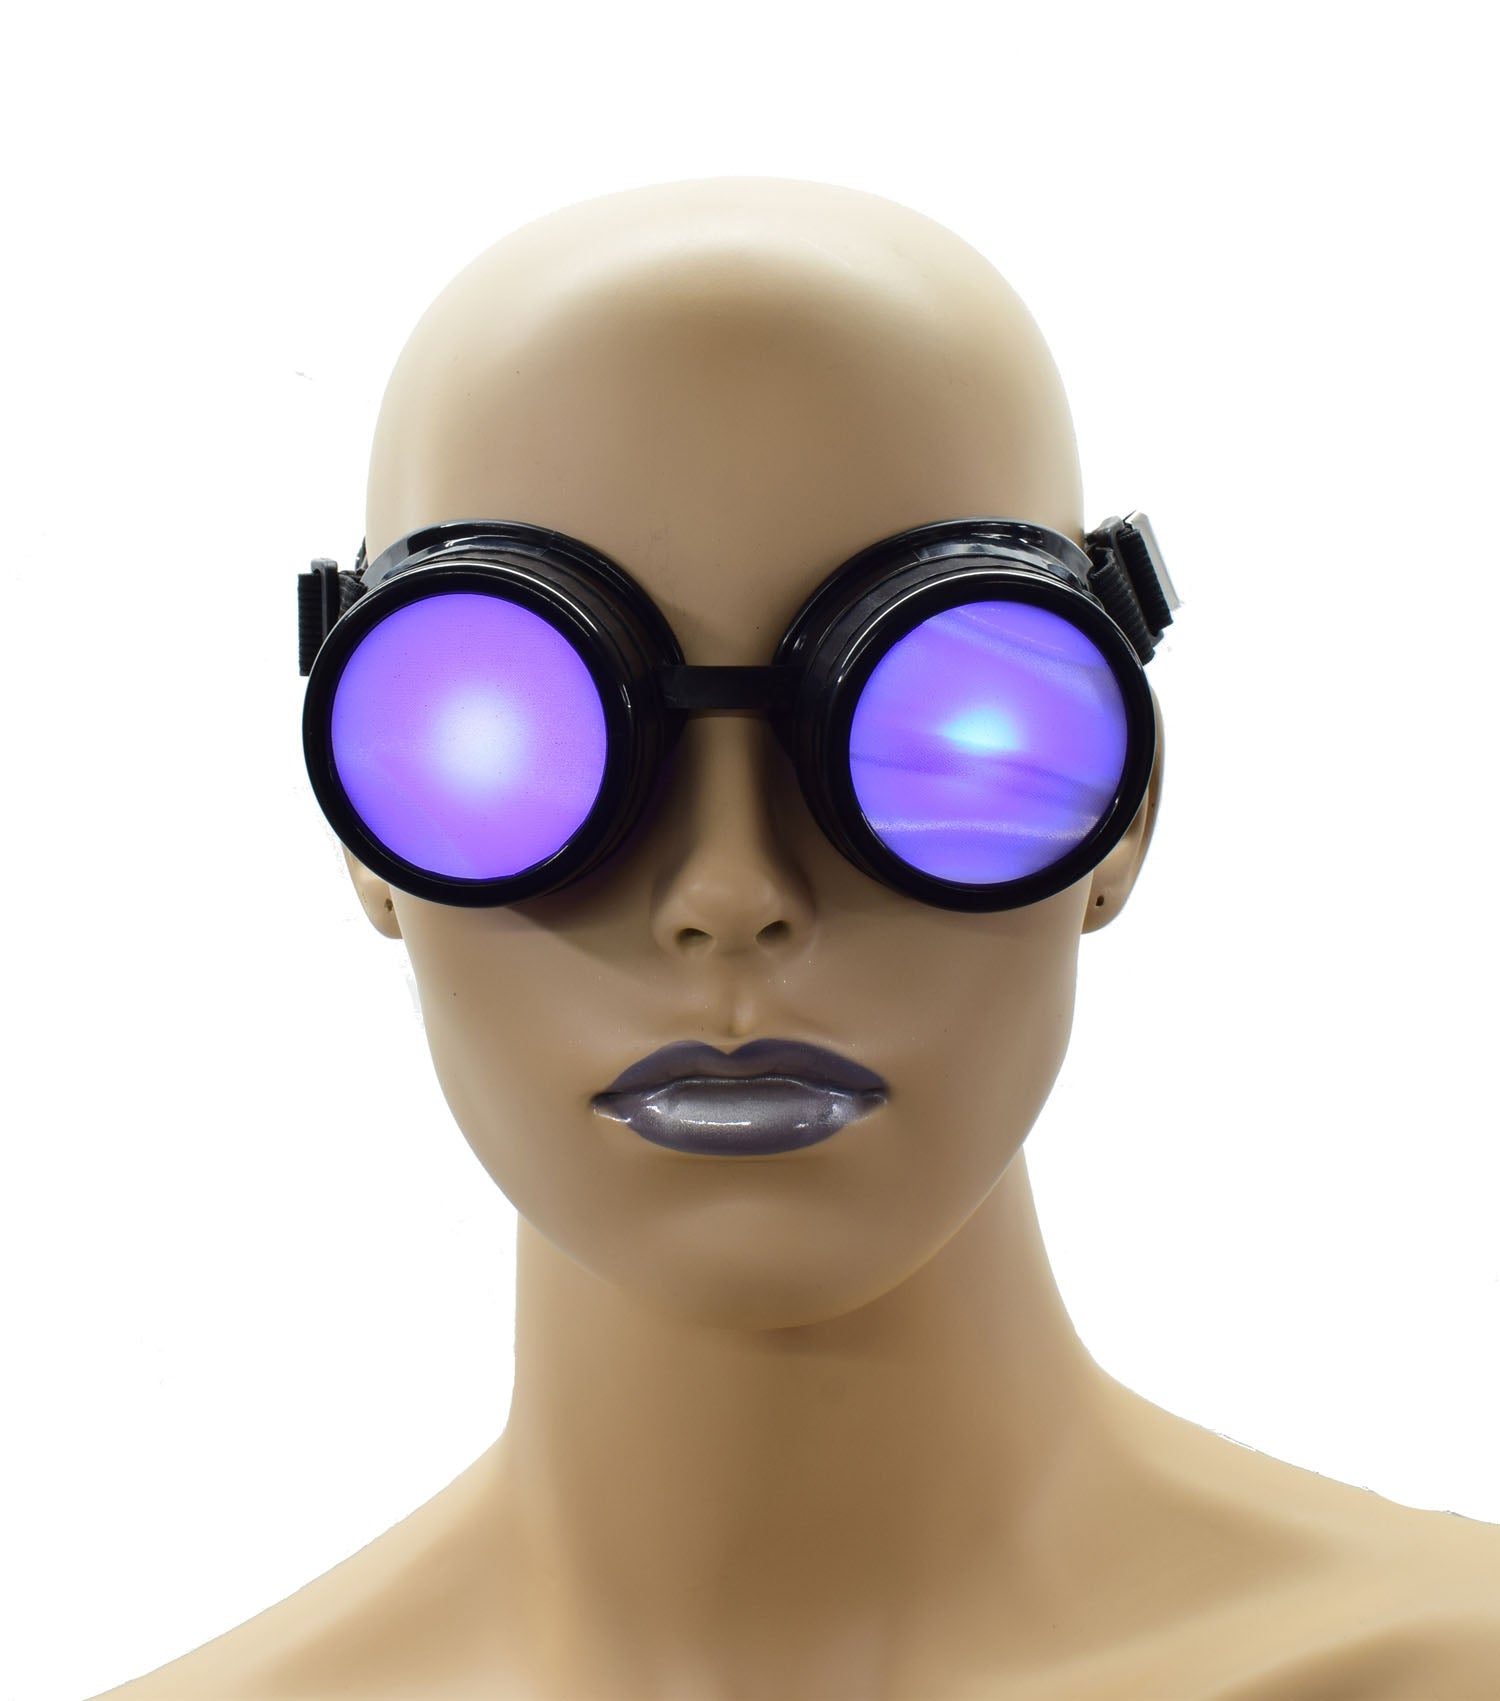 The Aurora Lights Blindfold on a mannequin head with purple lights showing through the goggles, front view.